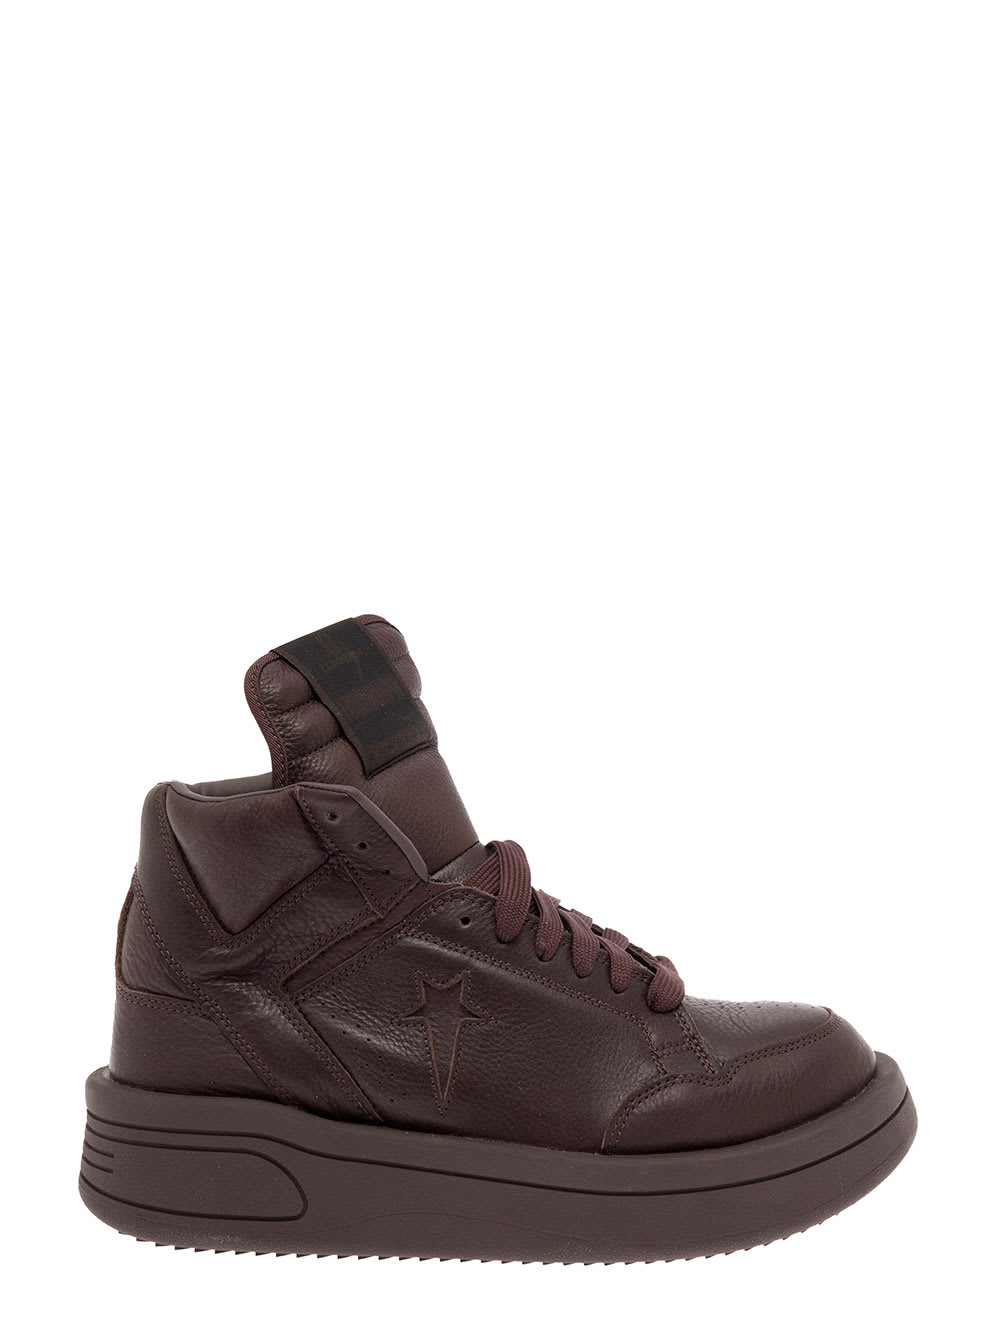 DRKSHDW Converse X Darkshdw Mans Brown Leather High Top Turboxpn Sneakers